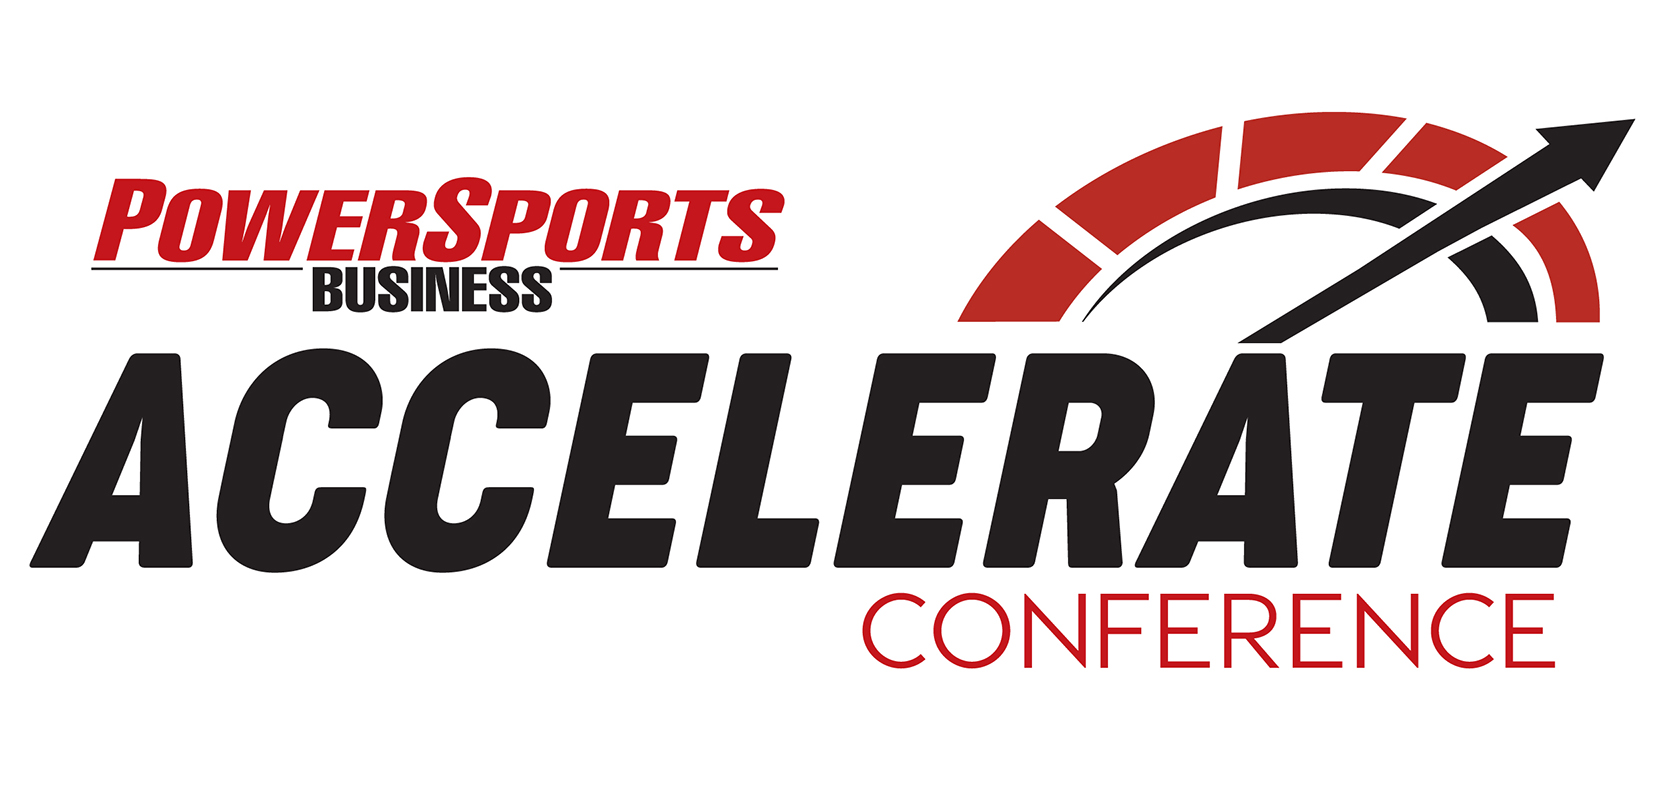 Accelerate Conference adds Silver-level sponsor